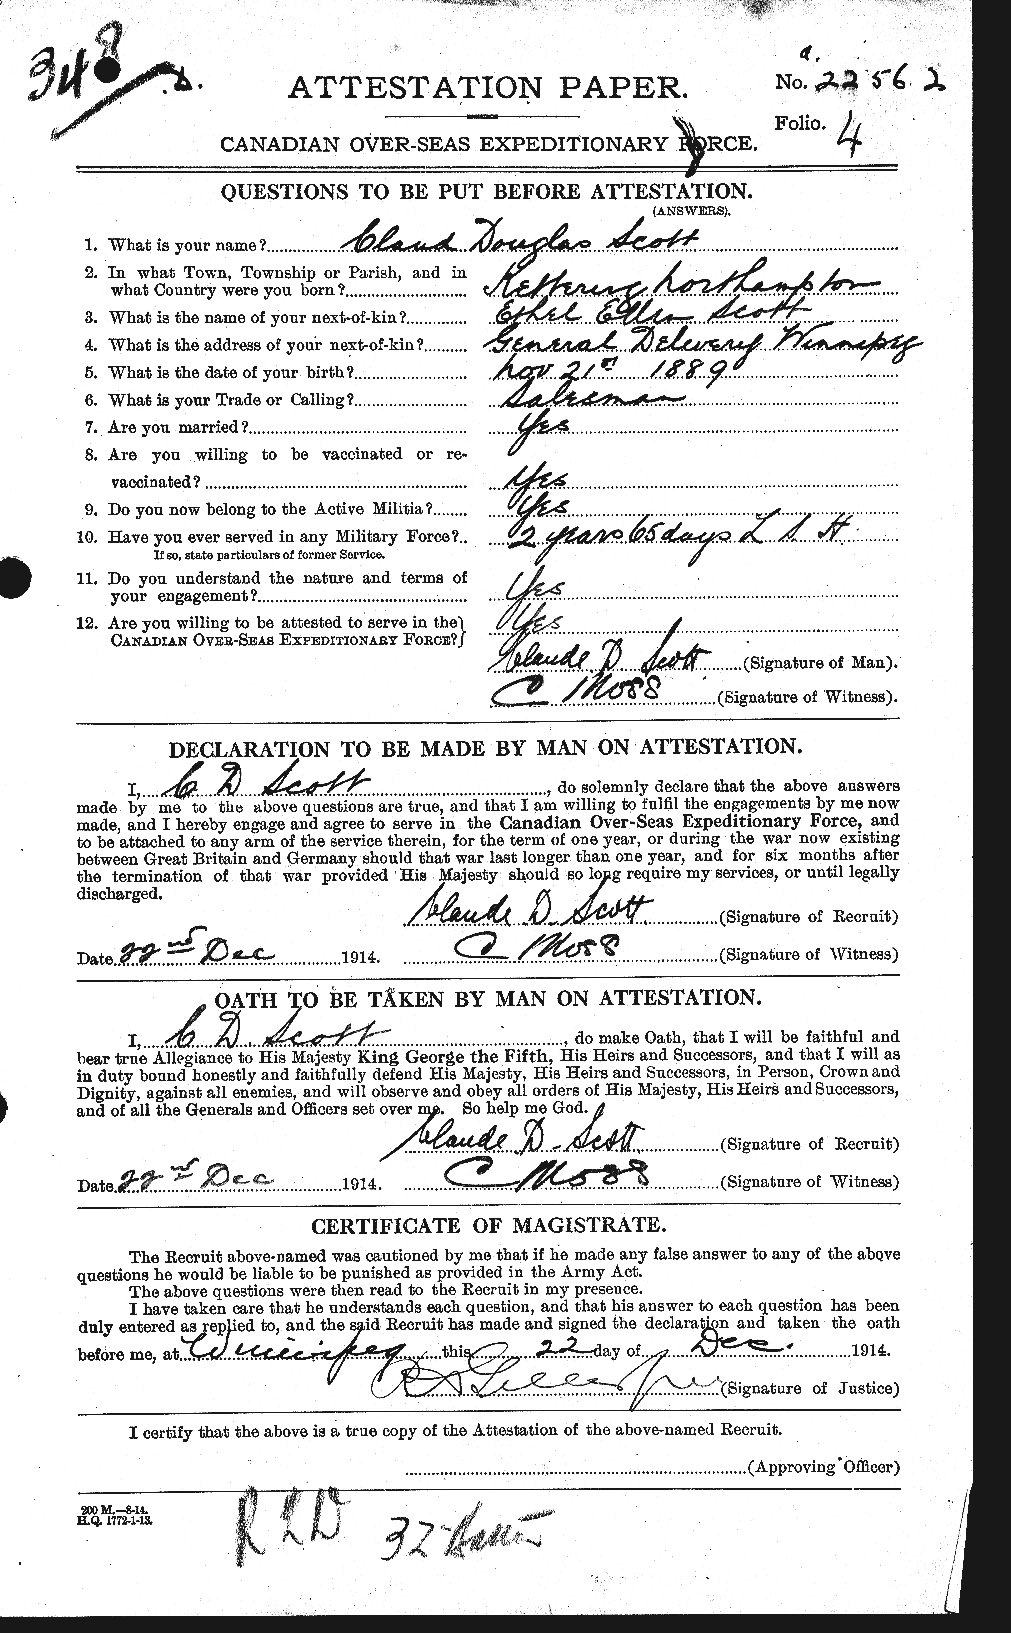 Personnel Records of the First World War - CEF 085633a